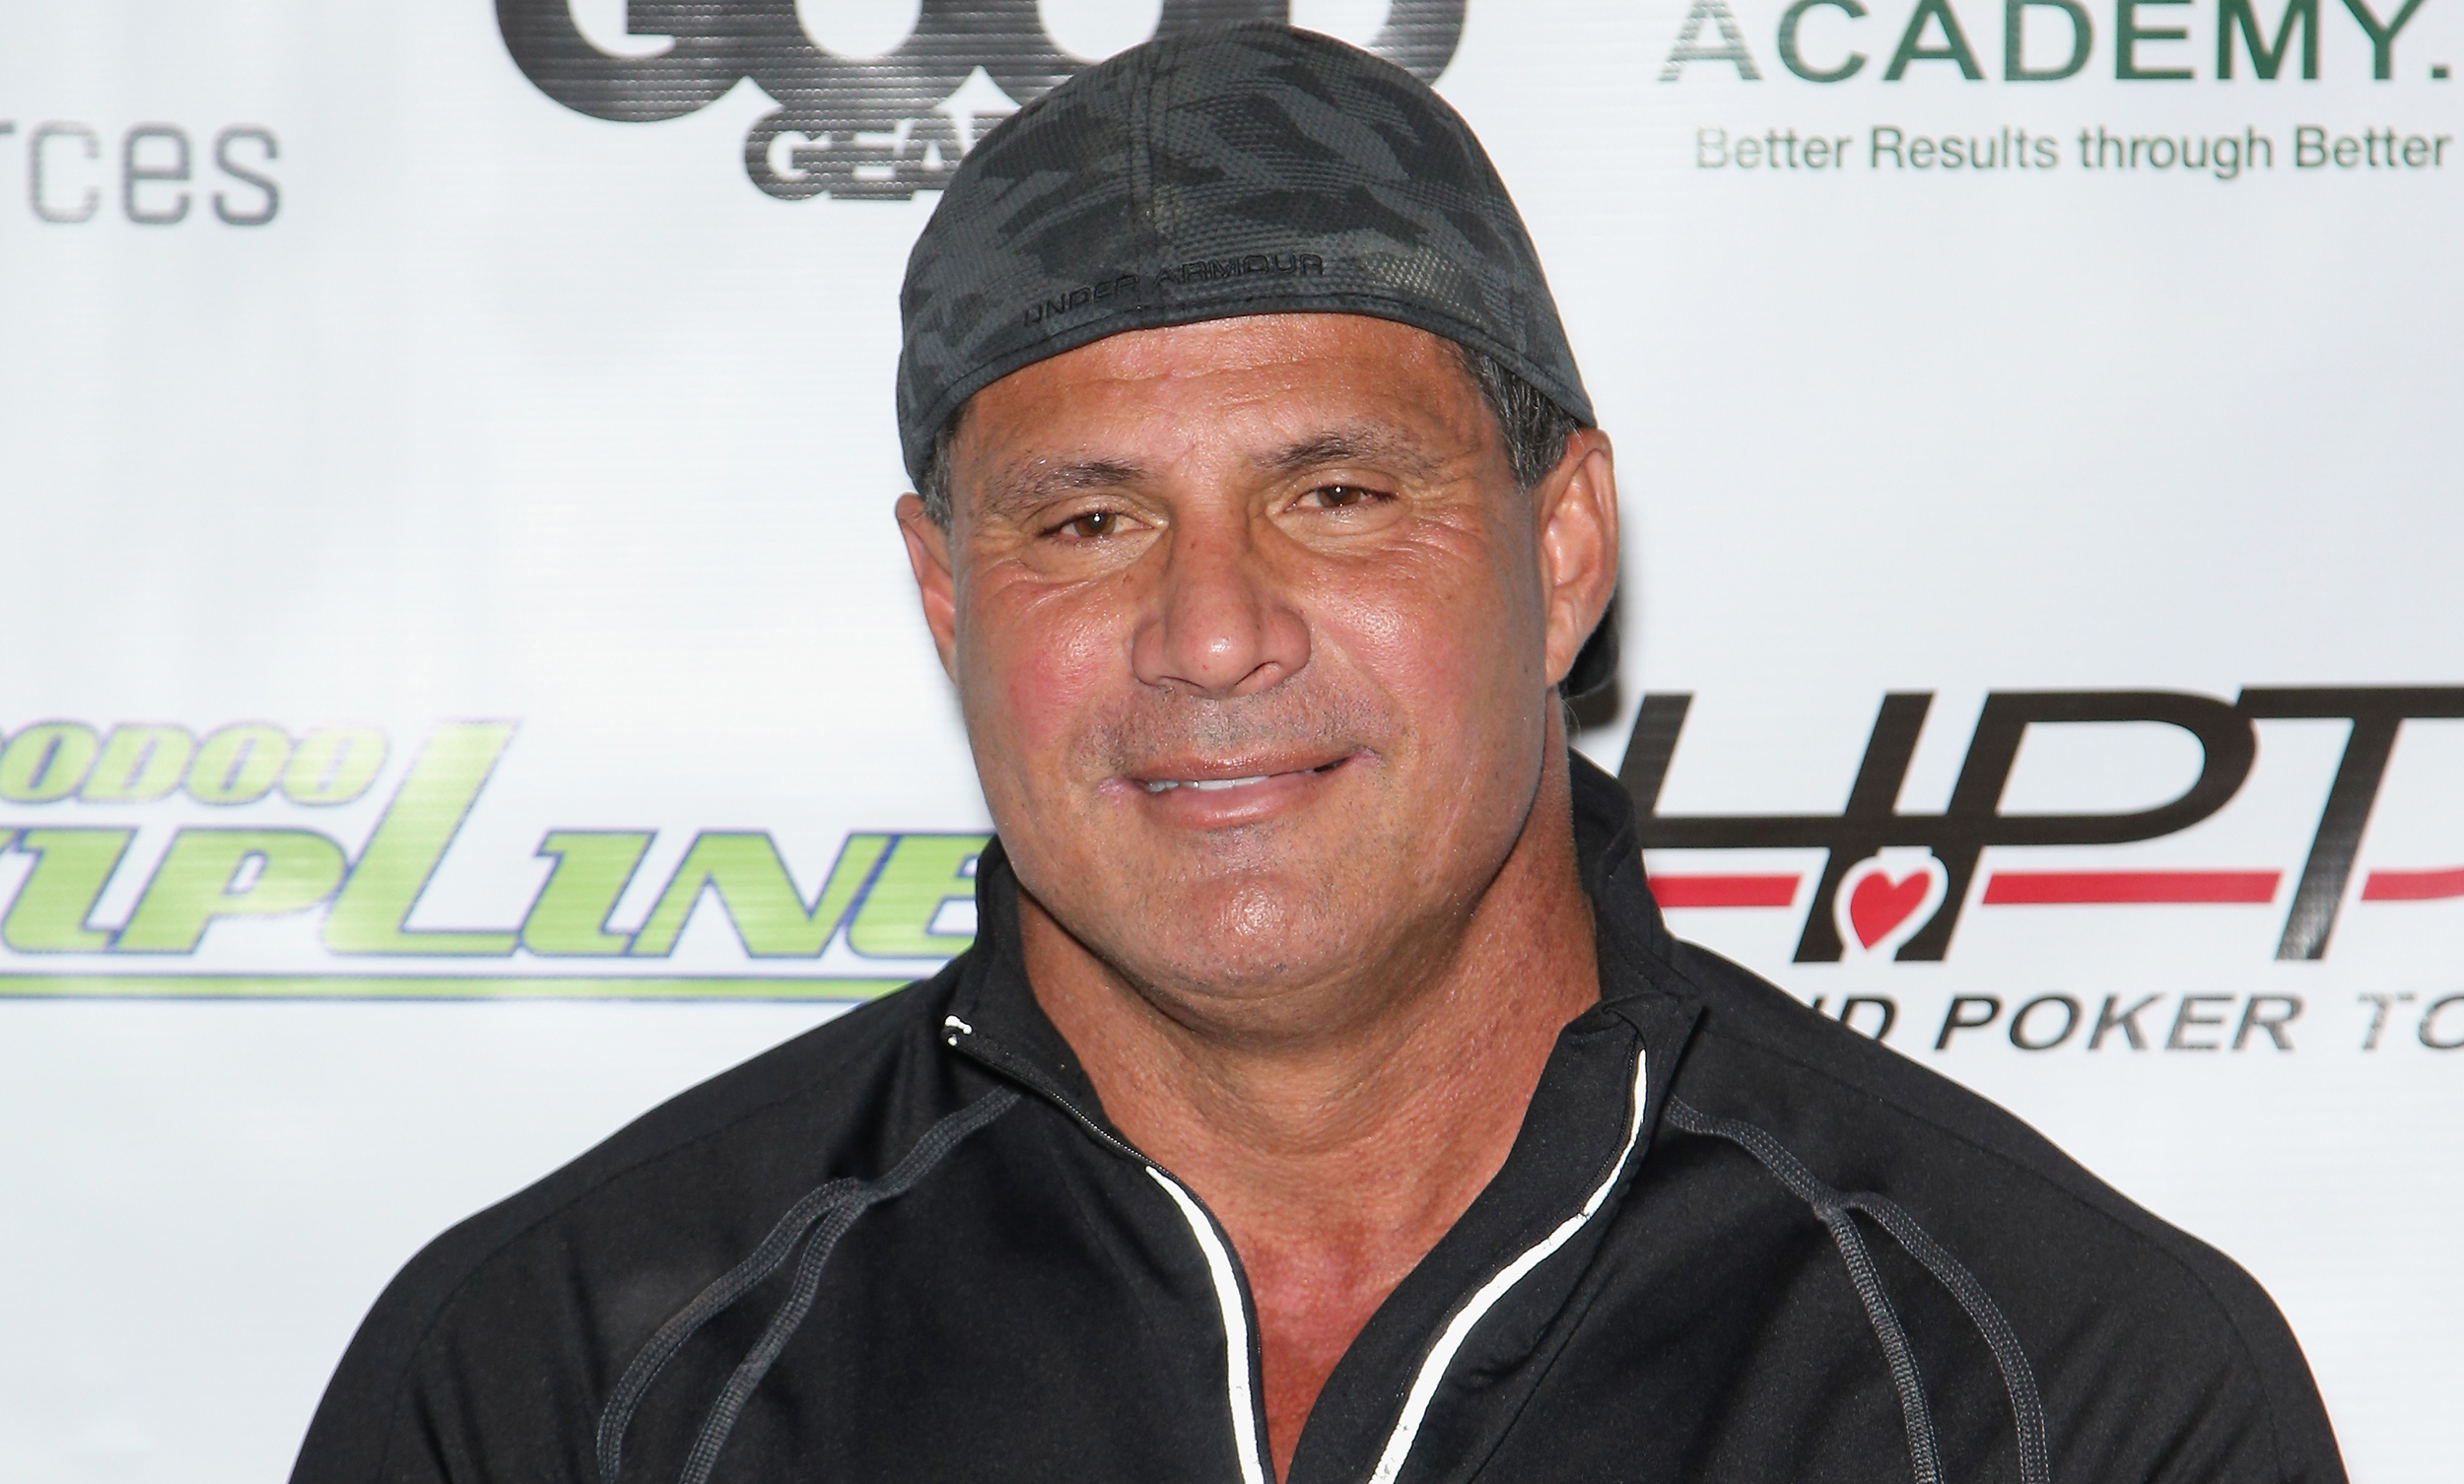 Jose Canseco 2021 - Net Worth, Career, Records, Personal Life and More